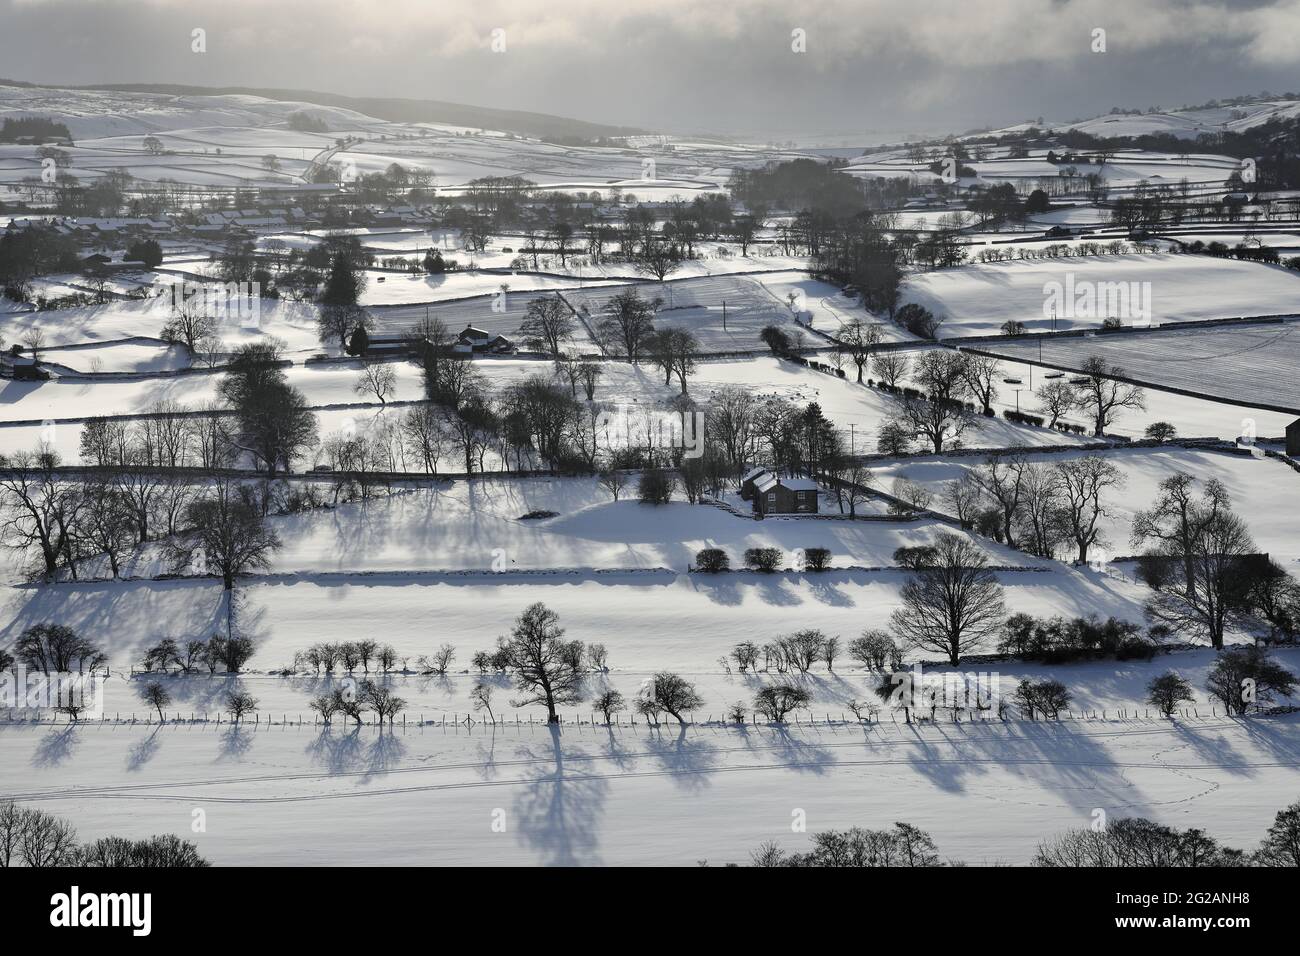 The View from Whistle Crag near Middleton-in-Teesdale Towards the Village of Mickleton in Winter, Teesdale, County Durham UK Stock Photo